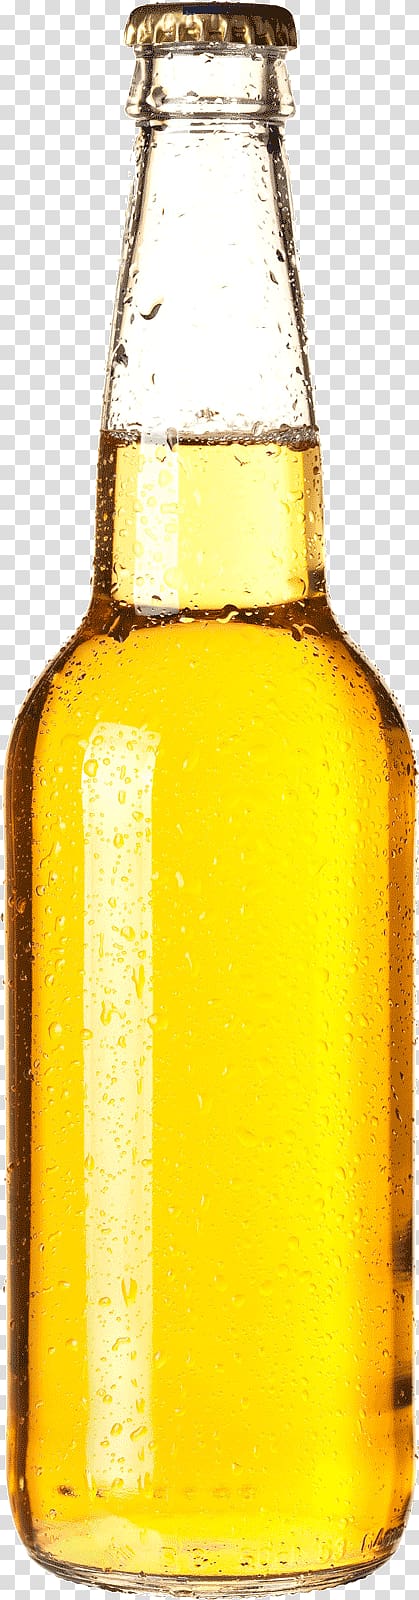 clear glass bottle filled with yellow liquid, Beer bottle Corona Brewery, Glass Bottle Mockup transparent background PNG clipart